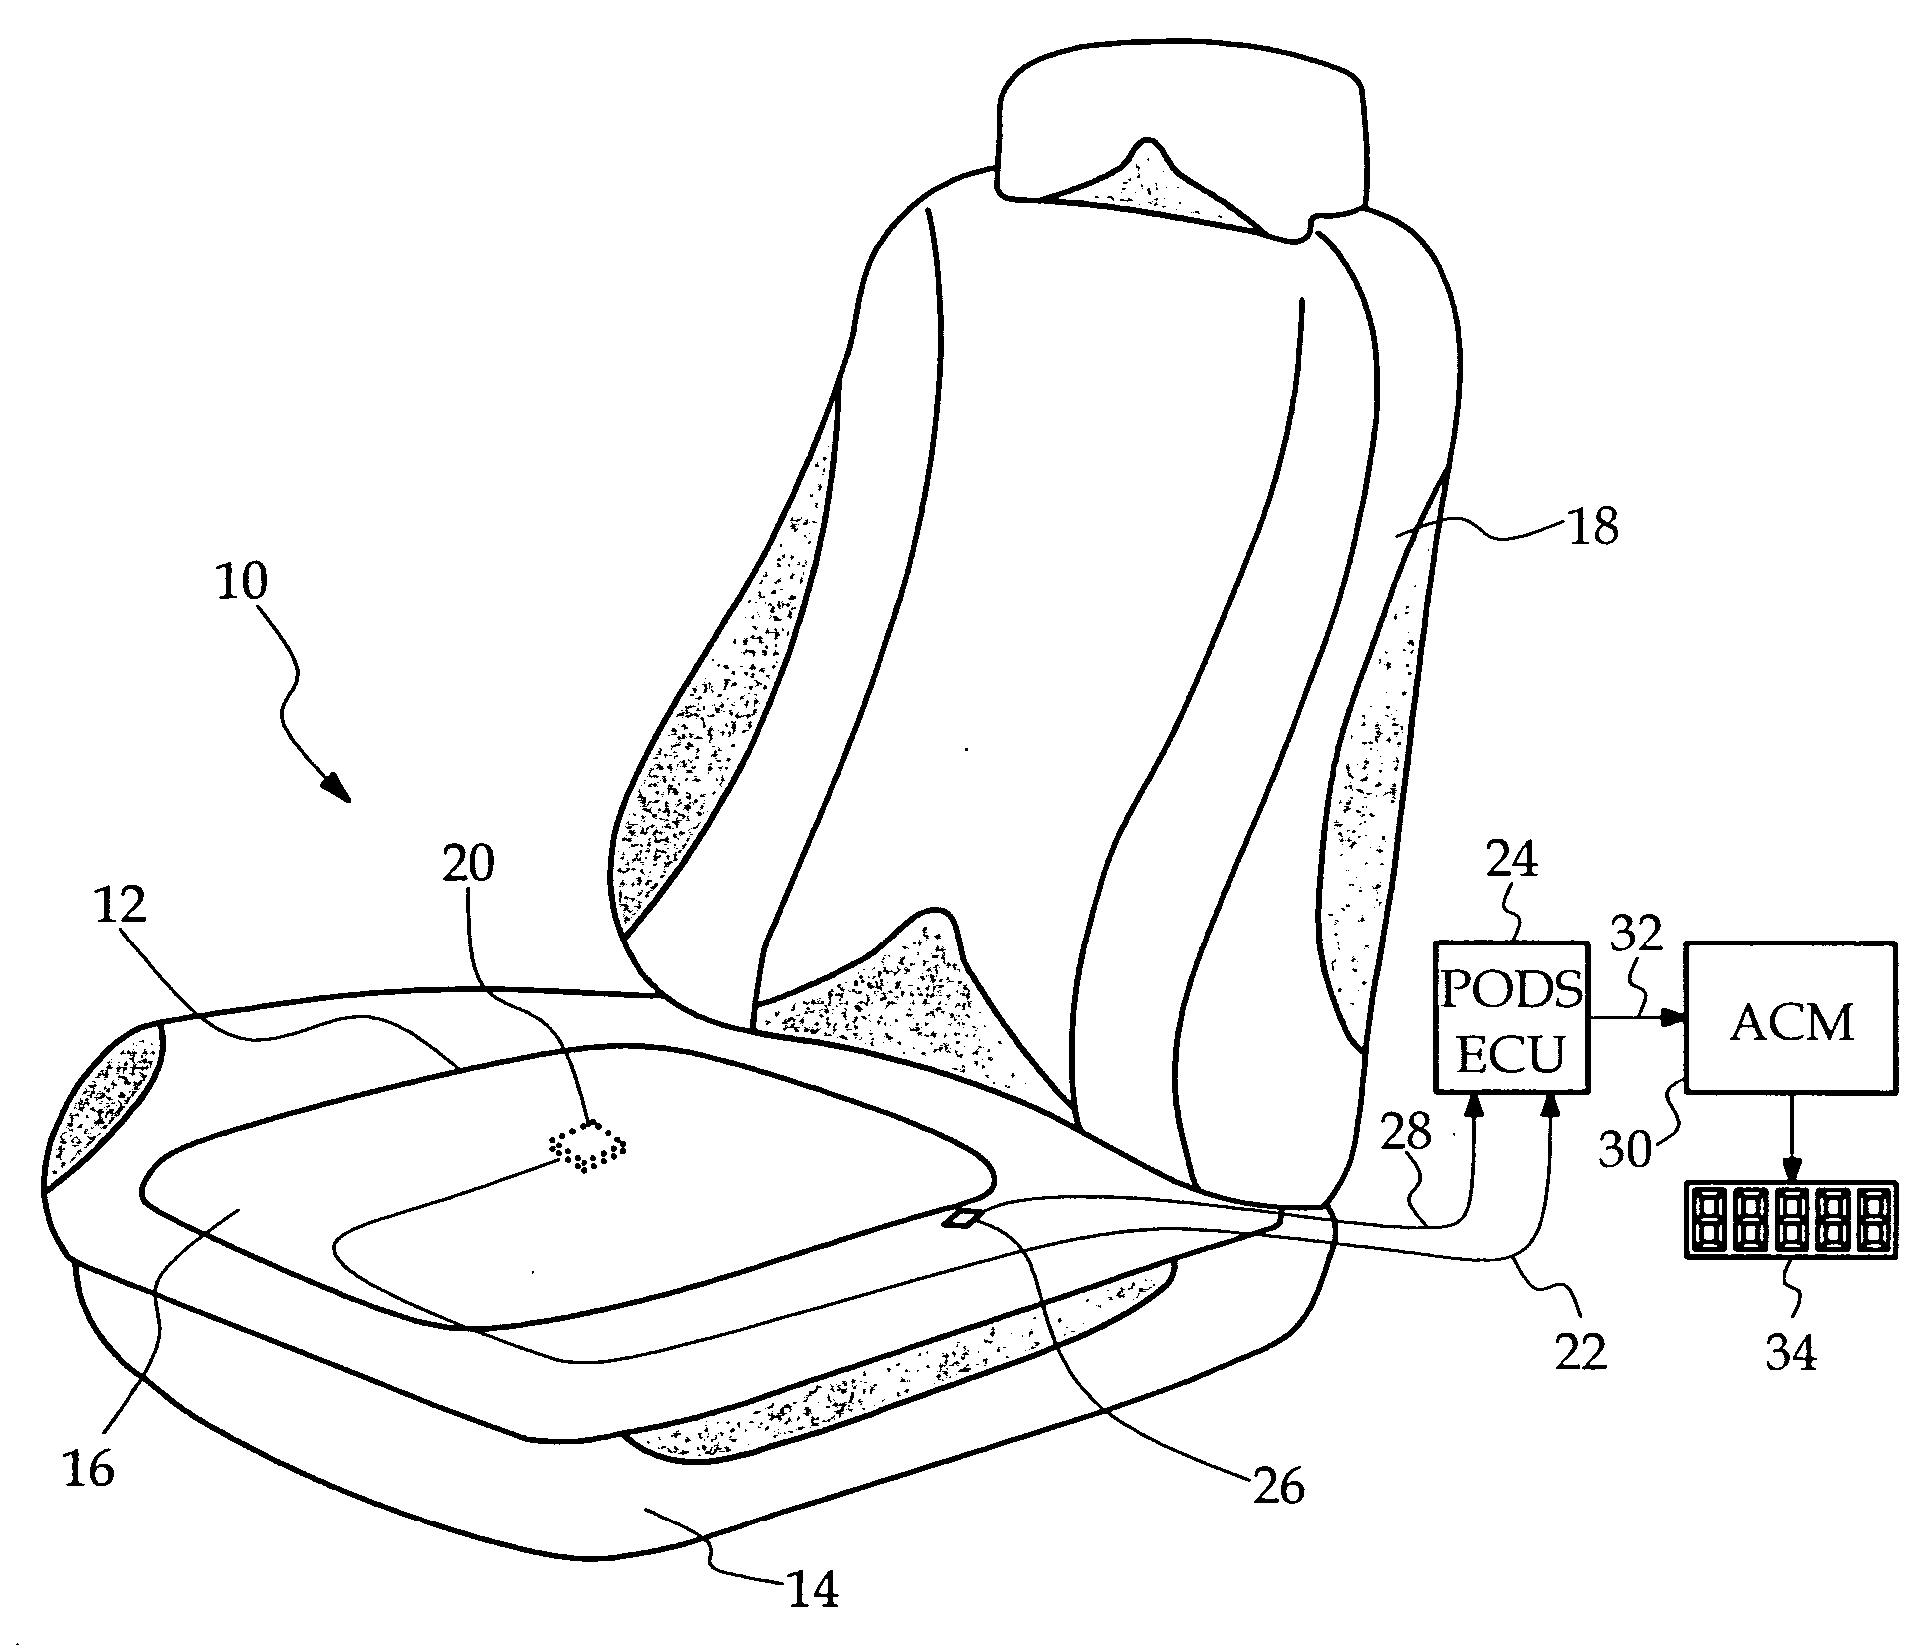 Method of characterizing an adult occupant of a vehicle seat based on a measure of seated weight